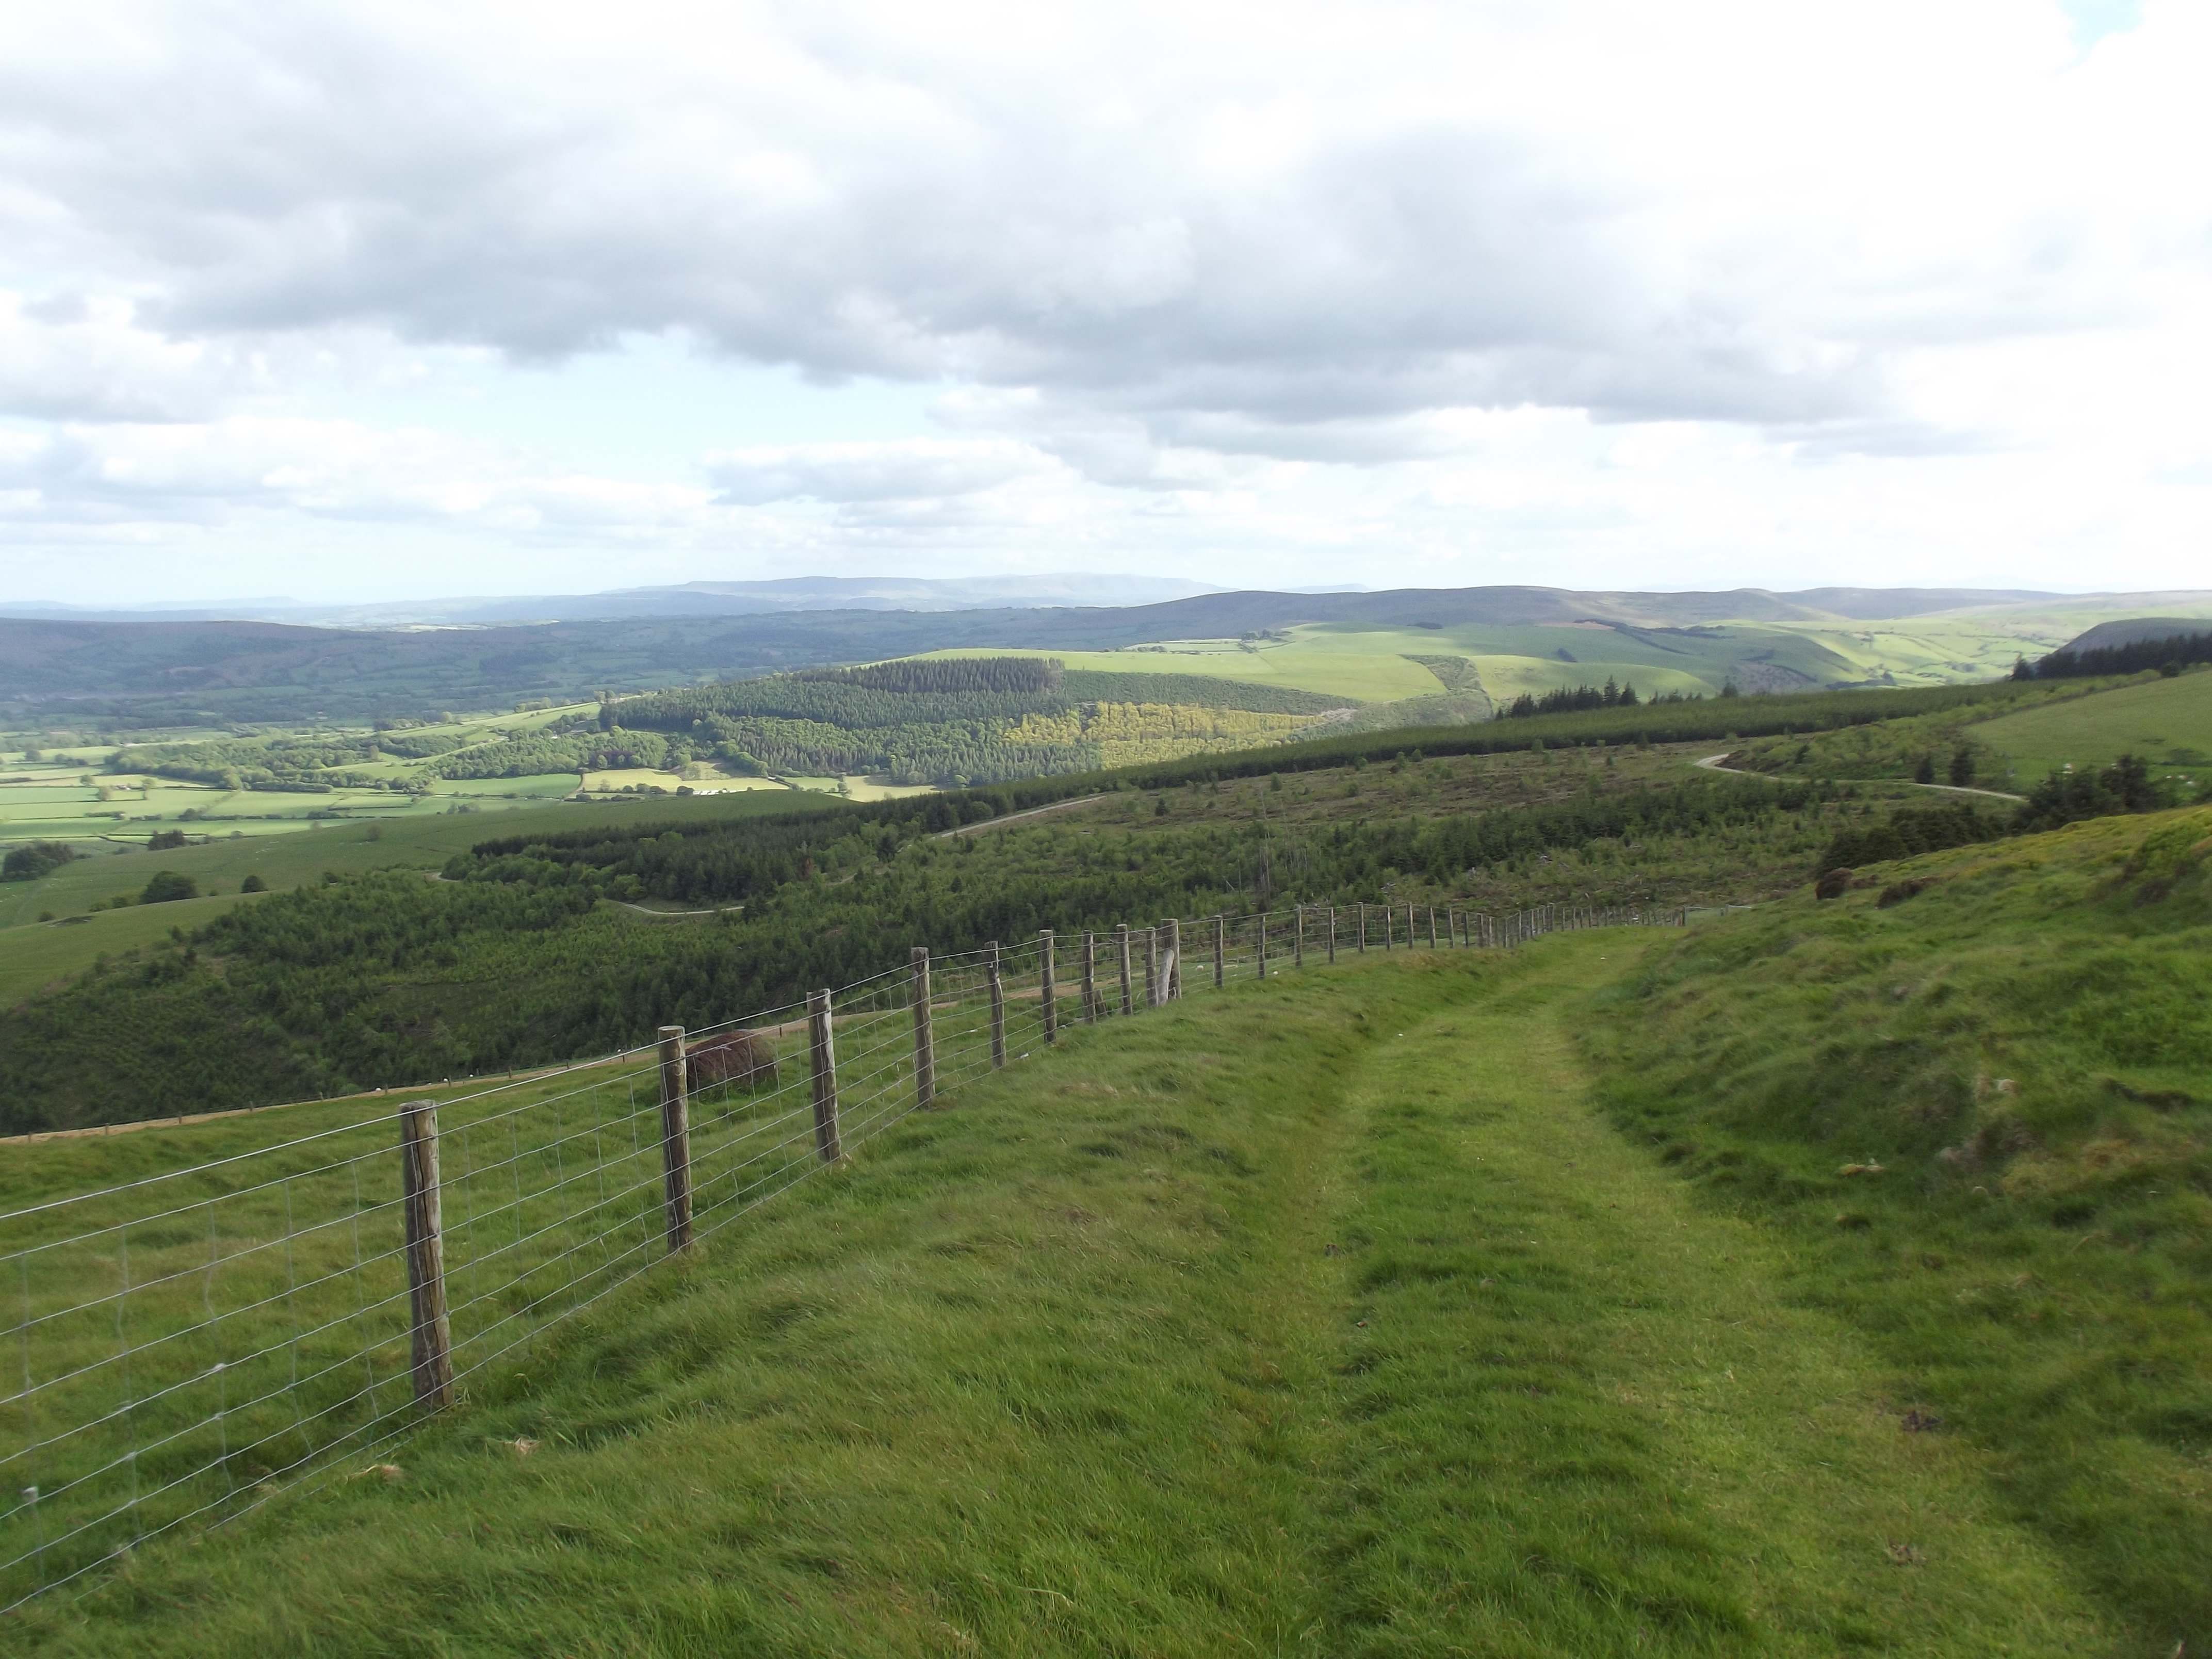 A holiday on the edge – Welsh/English borders